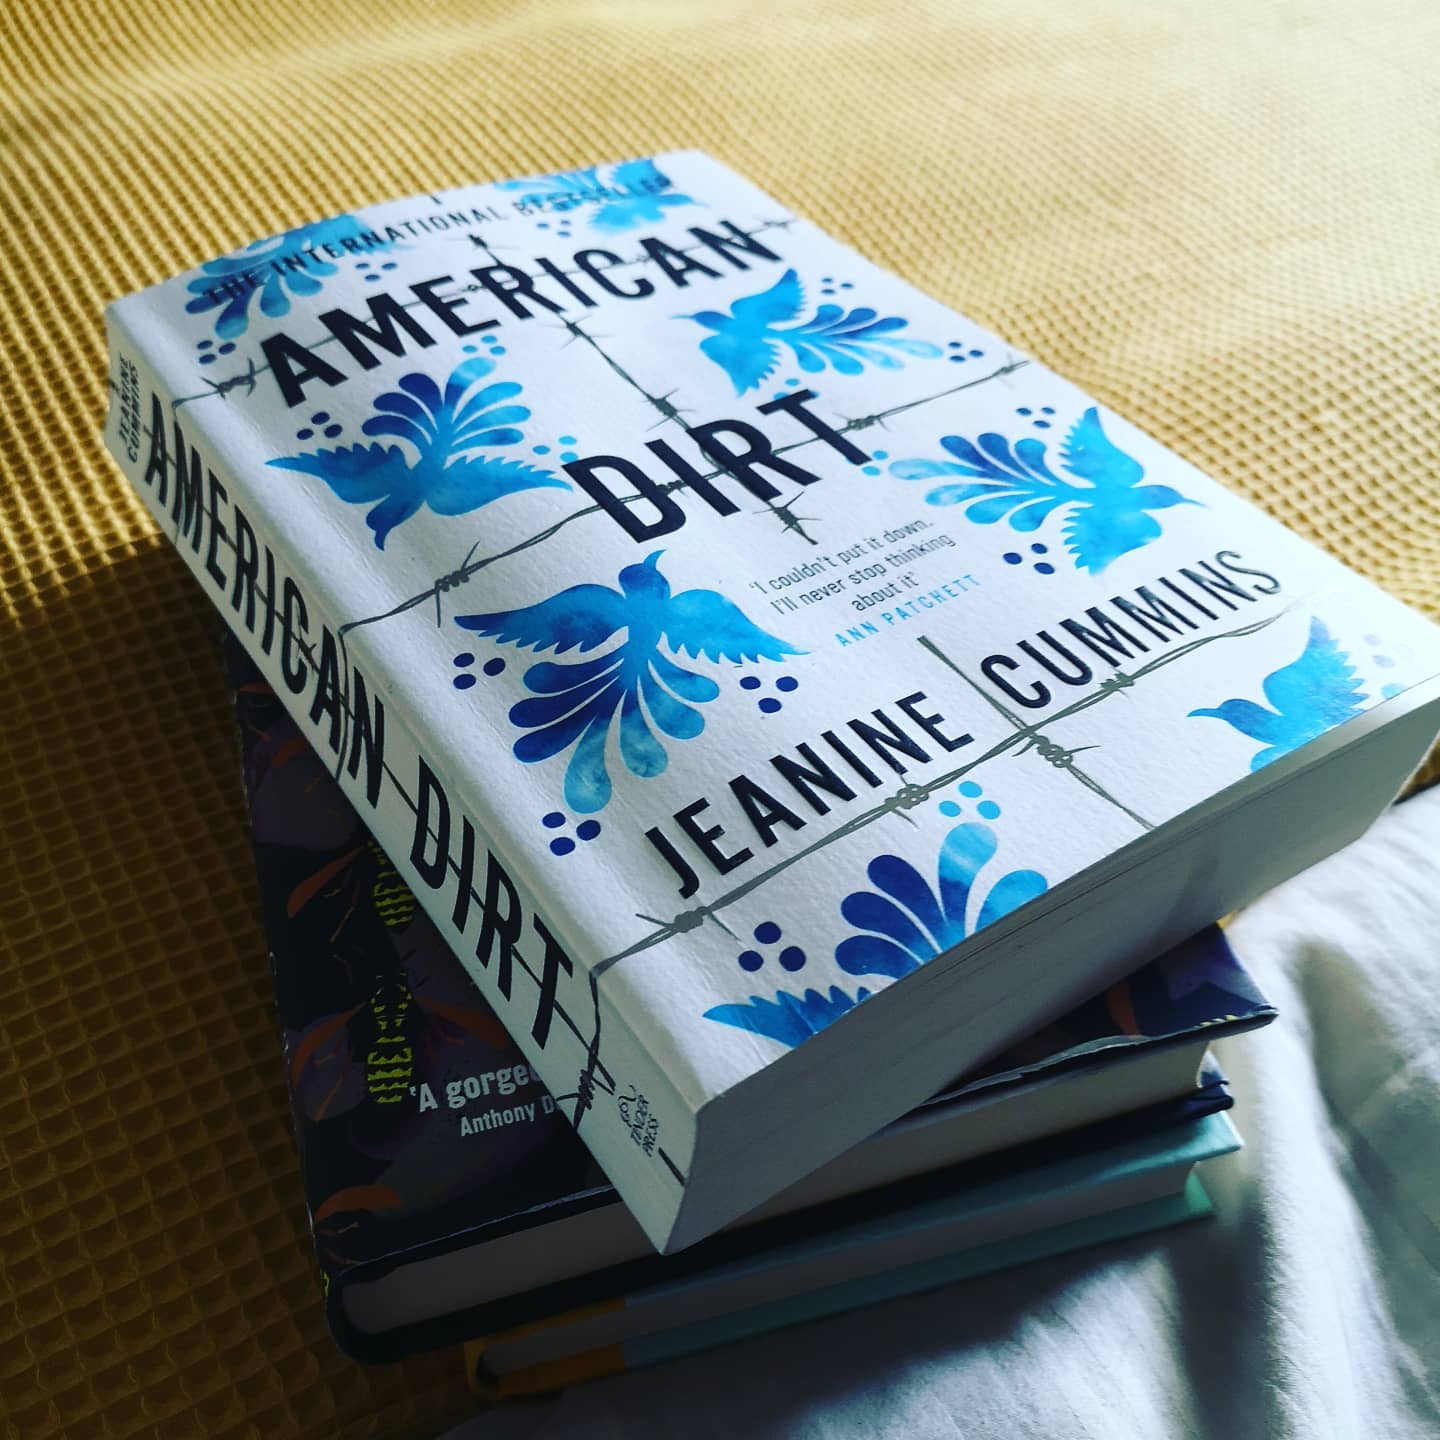 American Dirt.
This is a good book. She writes well. If it's a drama, plot based book you want, you might like this. I'm not sure if it really got to the surface of migration though.